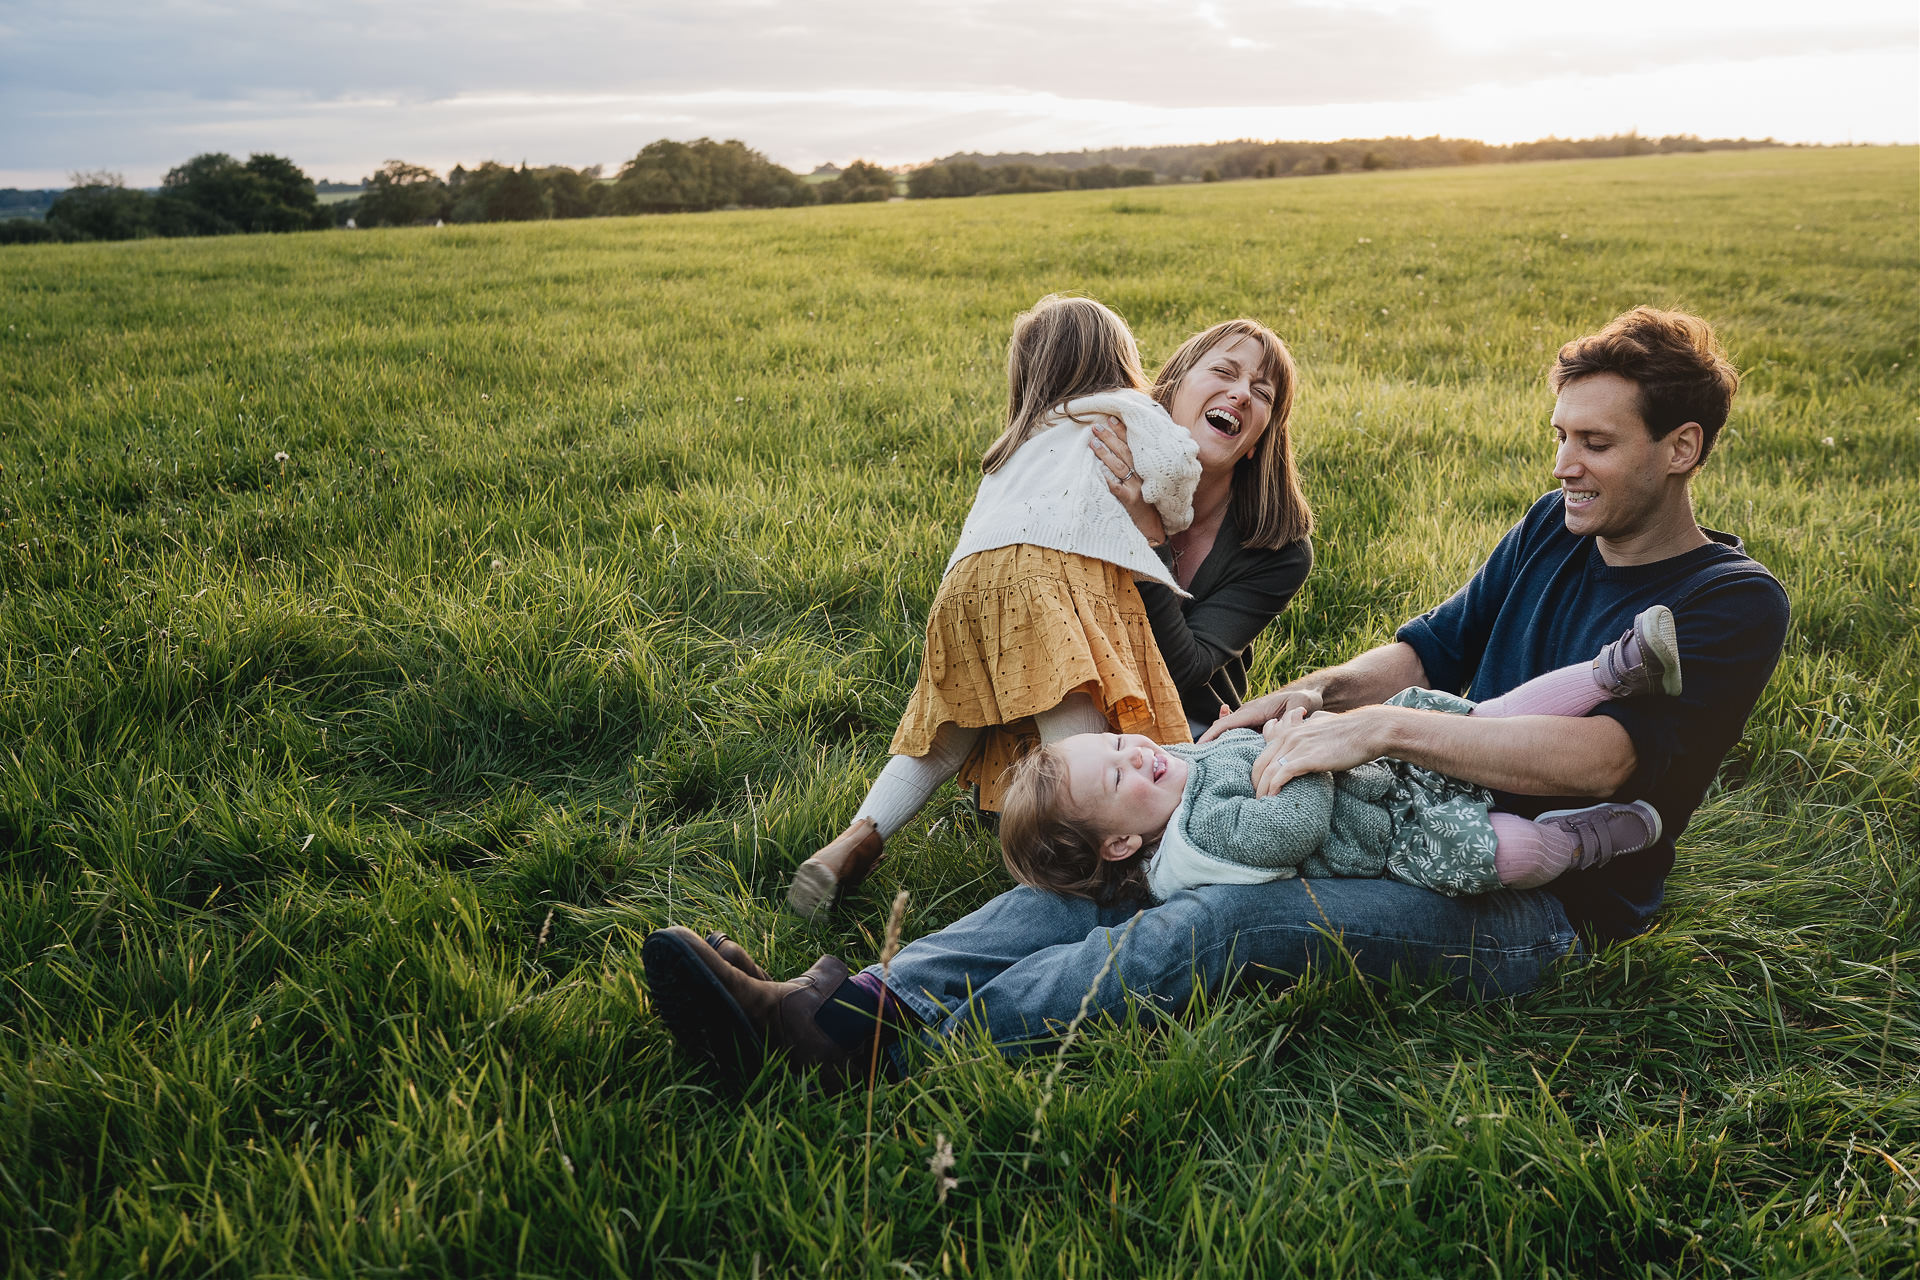 A relaxed family photography portrait of a family cuddling and laughing together in a field